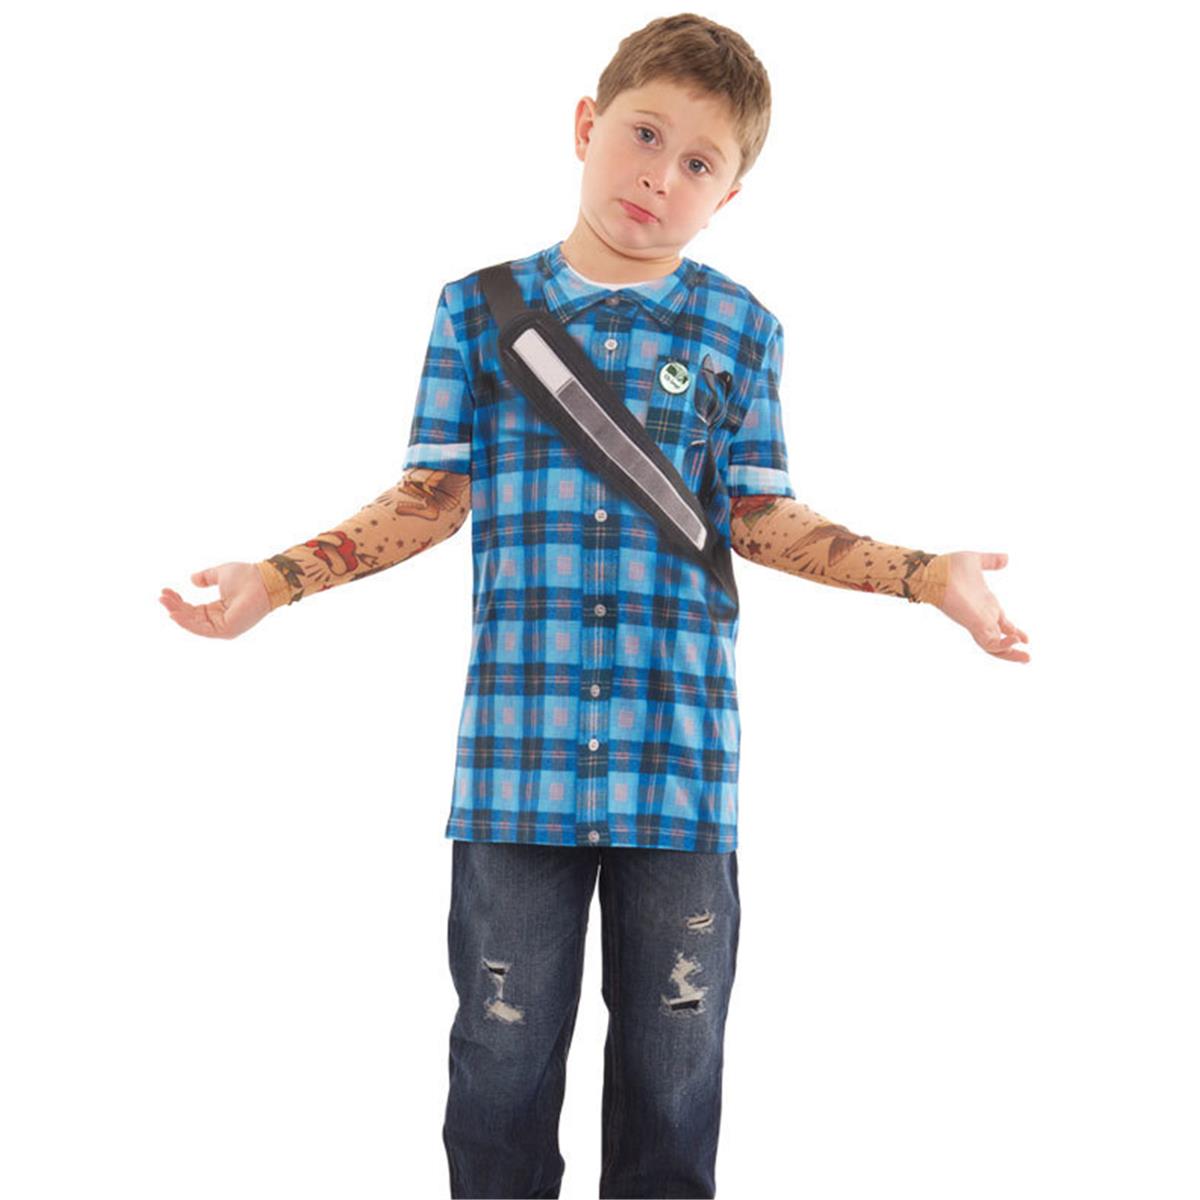 F134200-s Youth Hipster Plaid Tattoo - Small